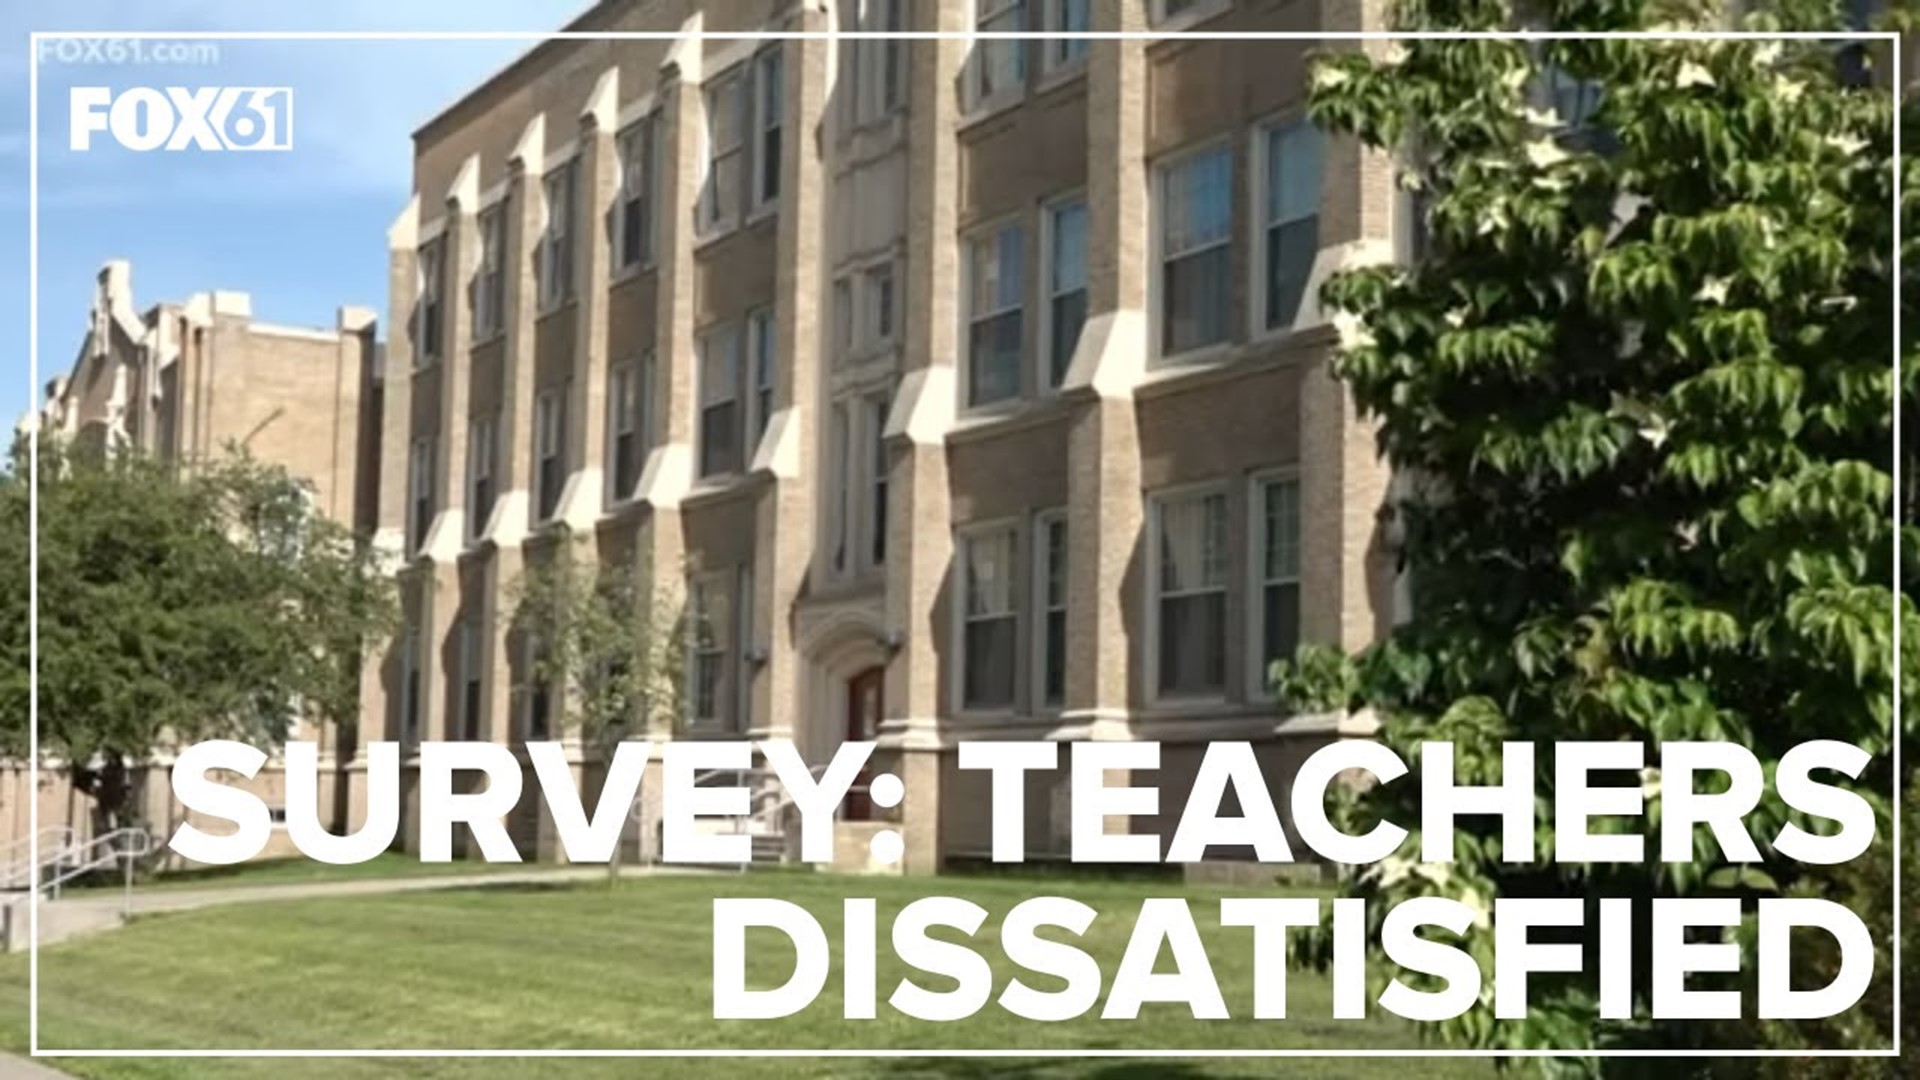 Nearly 50% of staff members who participated in the survey are either somewhat or very unsatisfied with their job in the district.